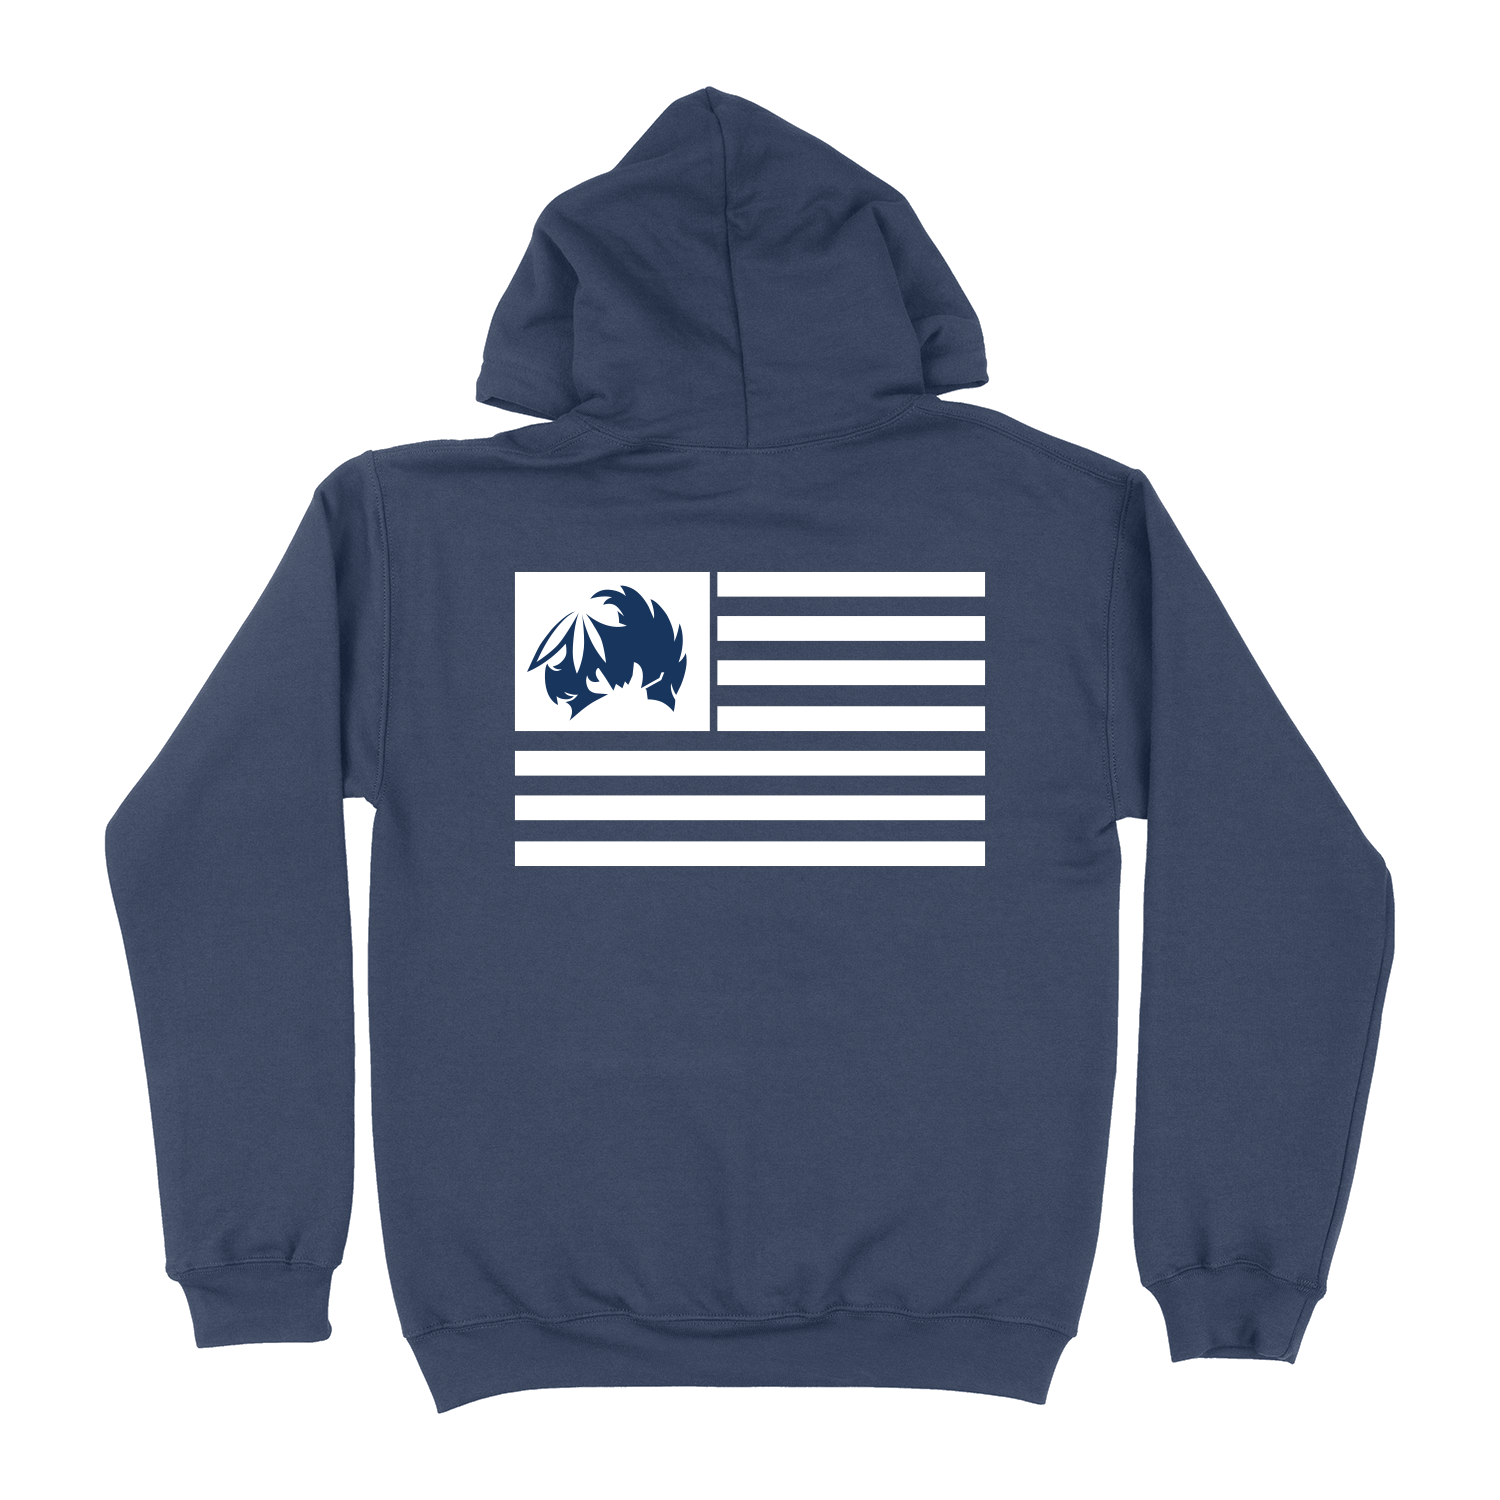 TICAL New York Pullover Hoodie Navy and White